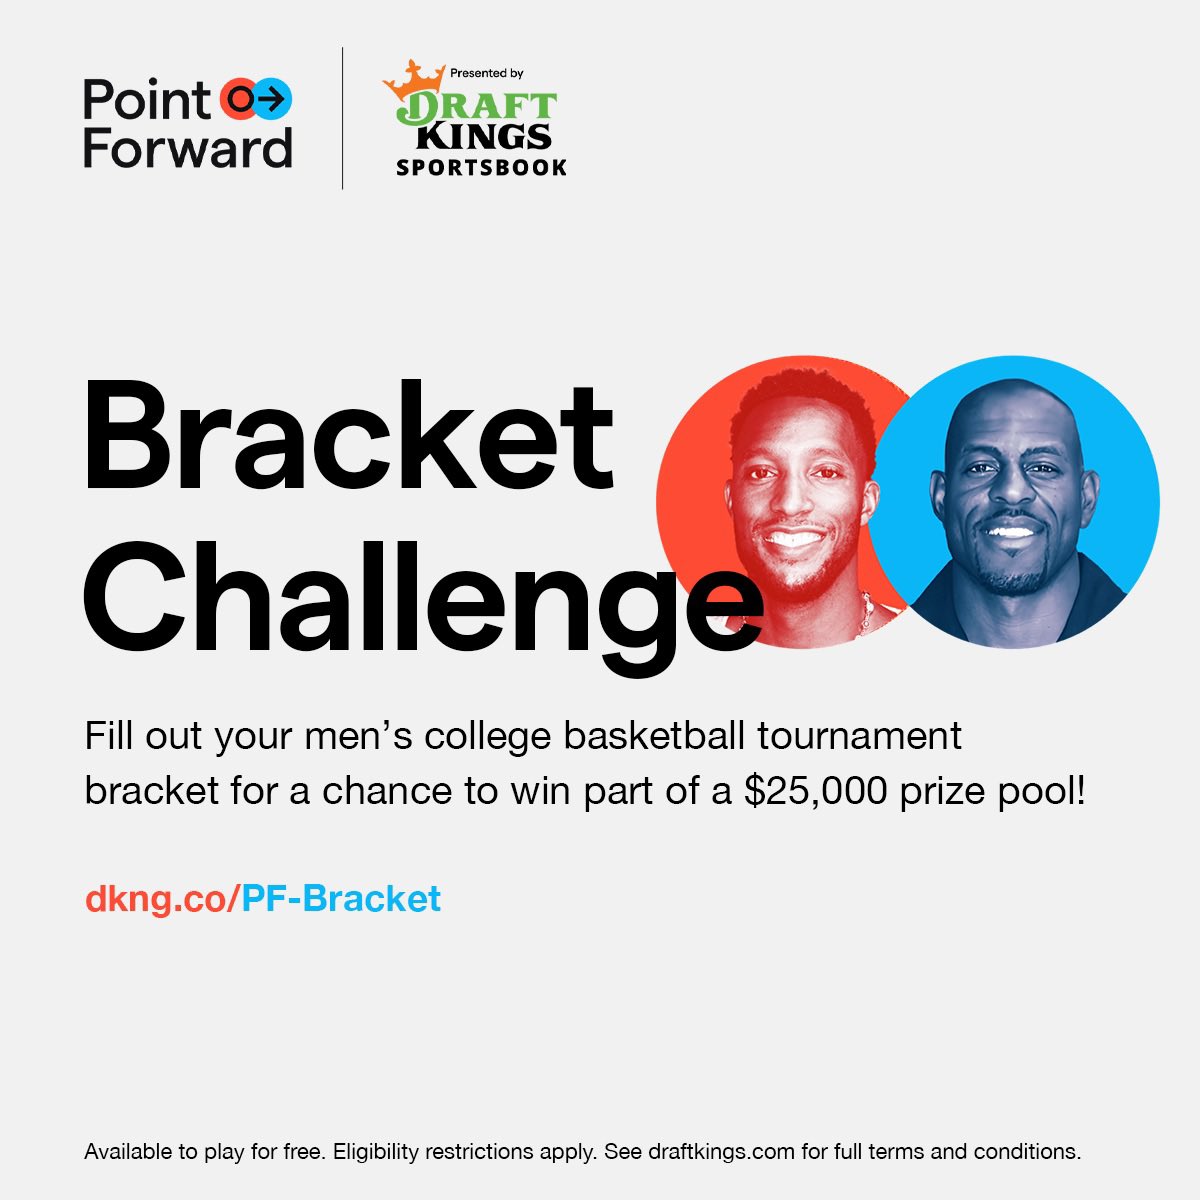 Happy Selection Sunday! 🏀 Don’t forget to sign up NOW and select your tournament winners TODAY on our @pointforward Bracket for a chance to win some of the $25,000 pool of cash. 💰 #dkpartner TAP IN 👉 dkng.co/PF-Bracket